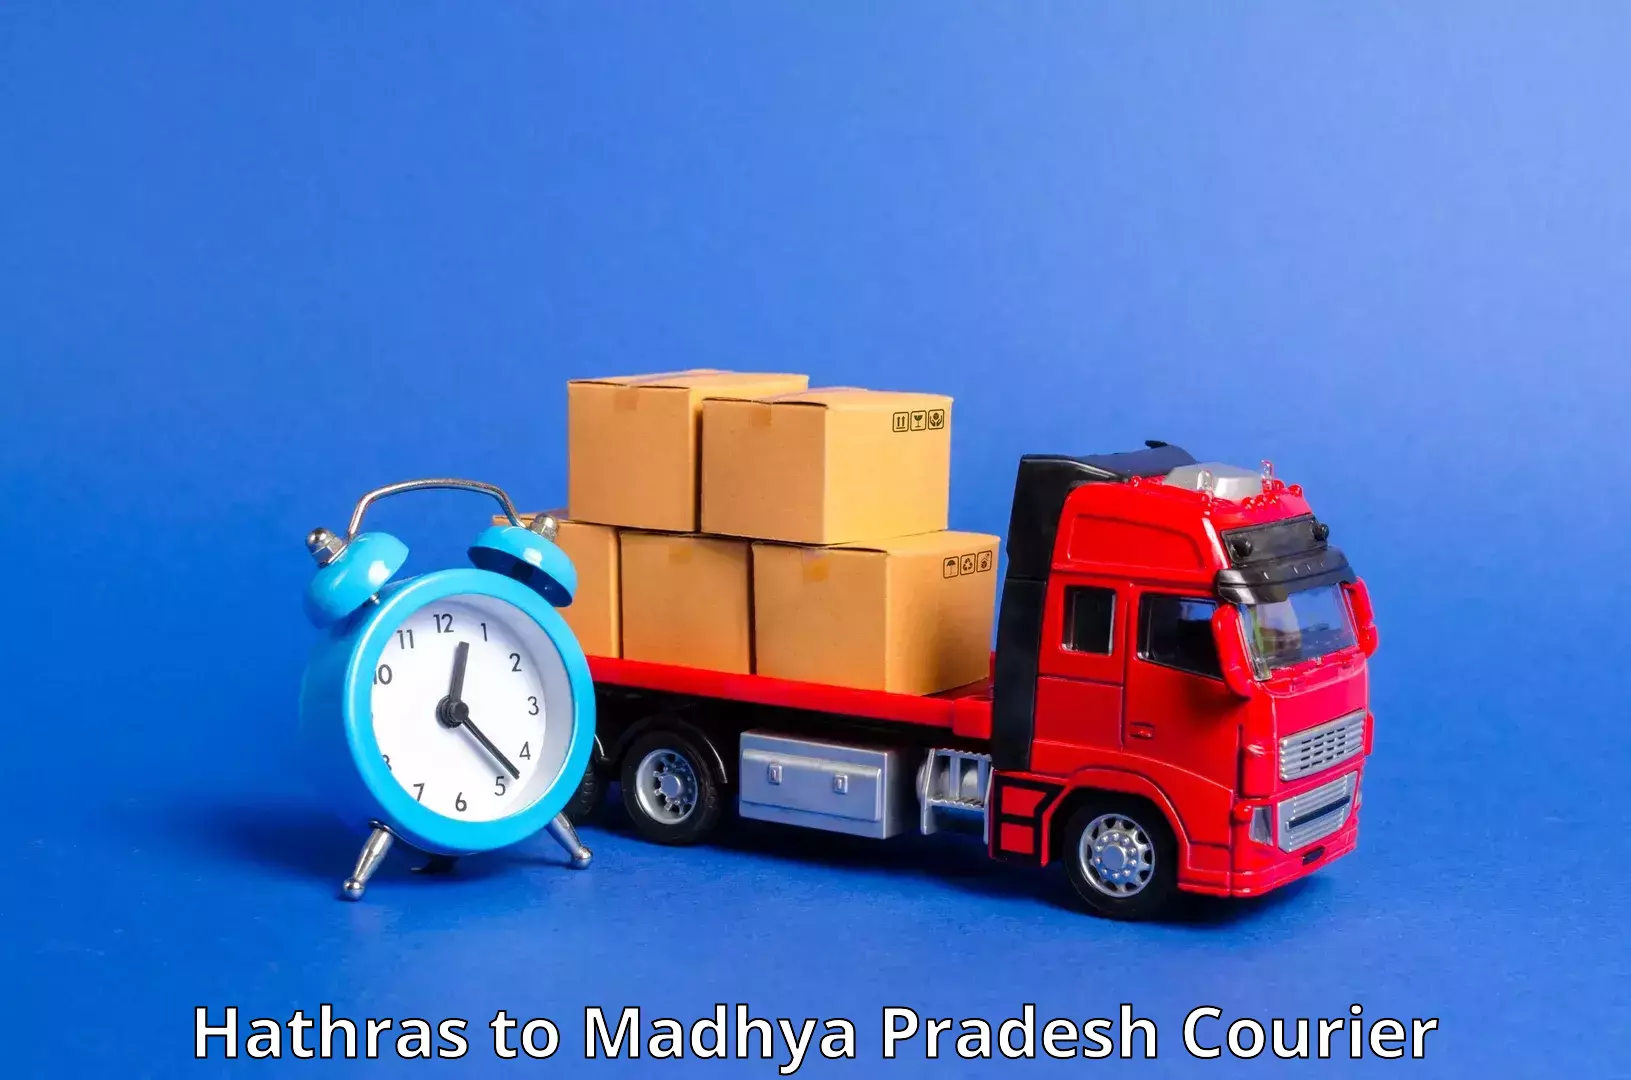 Reliable delivery network Hathras to Kareli